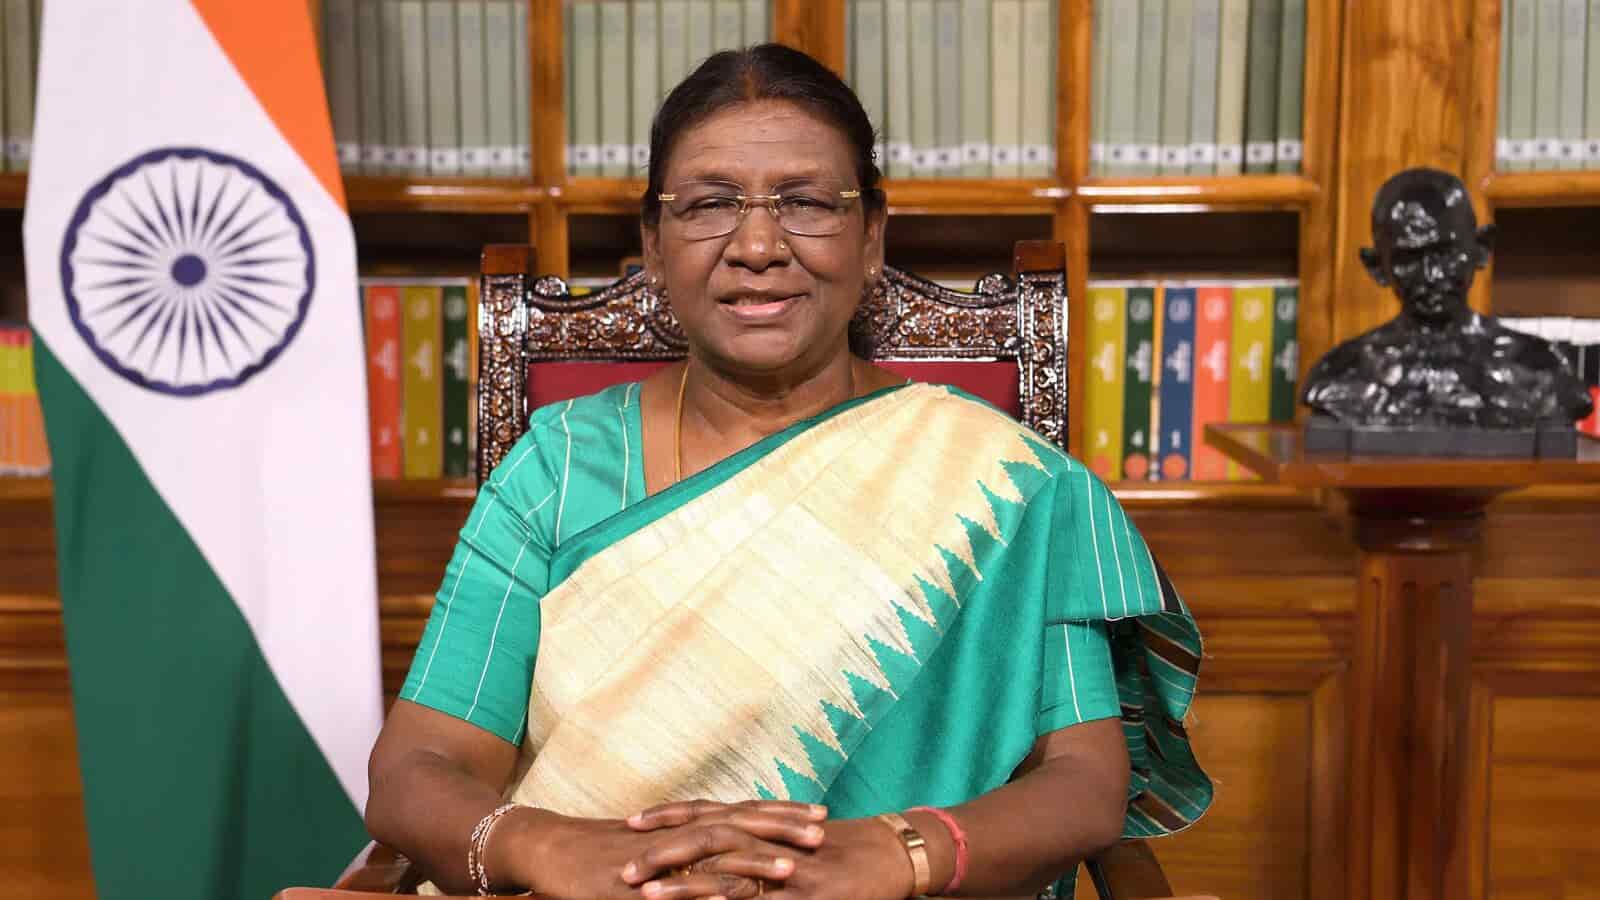 President Murmu to inaugurate two-day international Conference on 'Aerospace and Aviation in 2047' on Nov 18